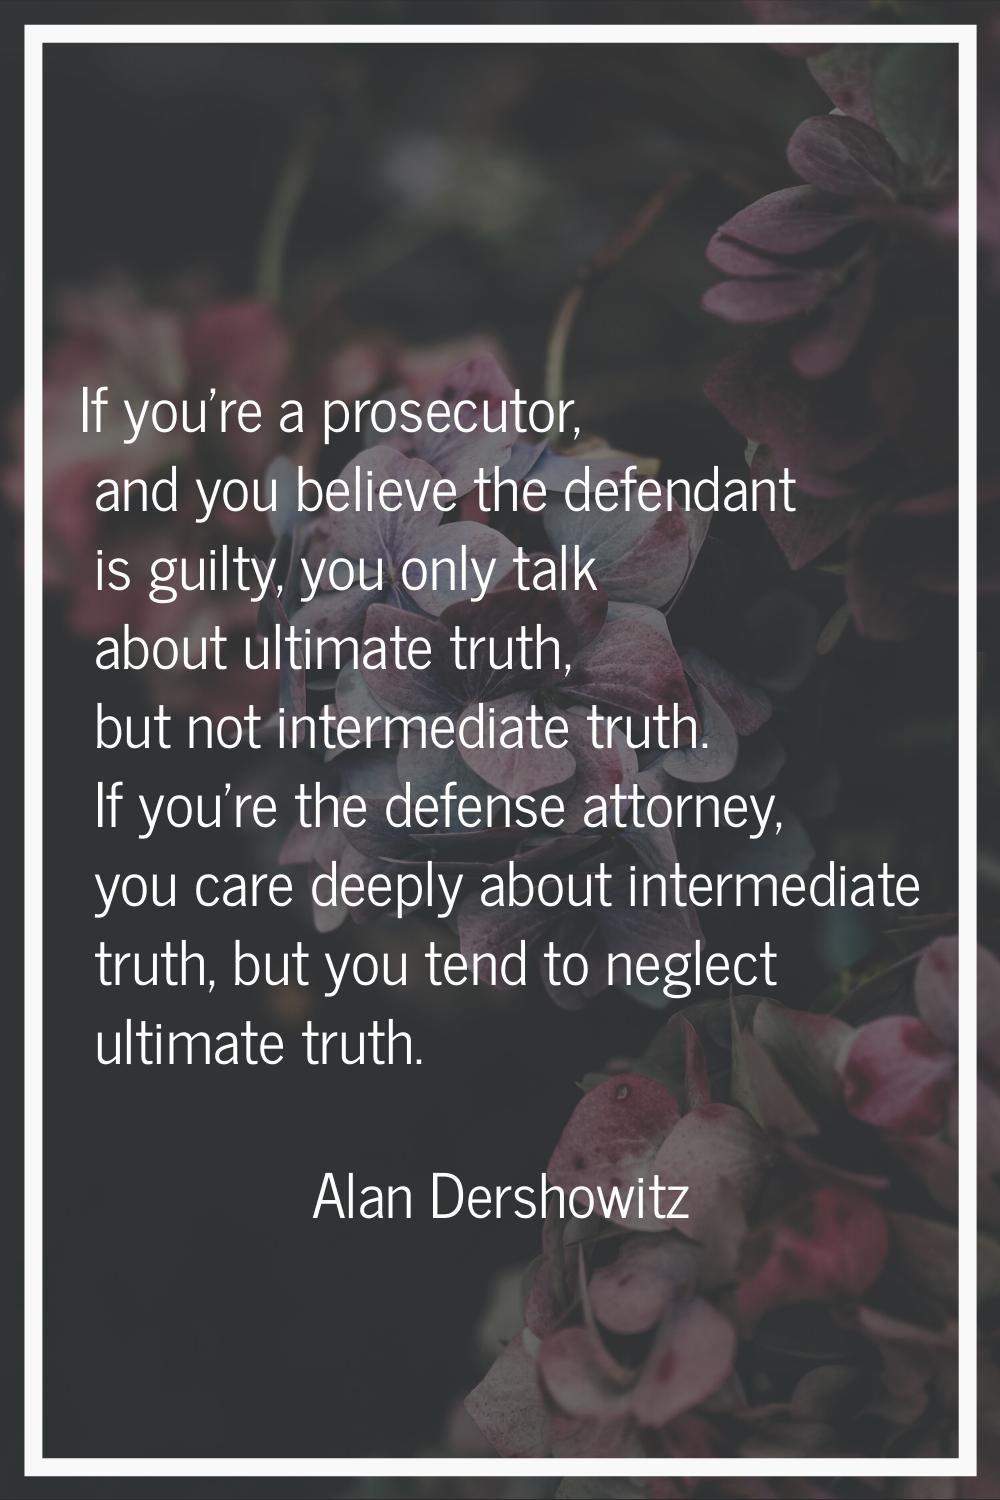 If you're a prosecutor, and you believe the defendant is guilty, you only talk about ultimate truth